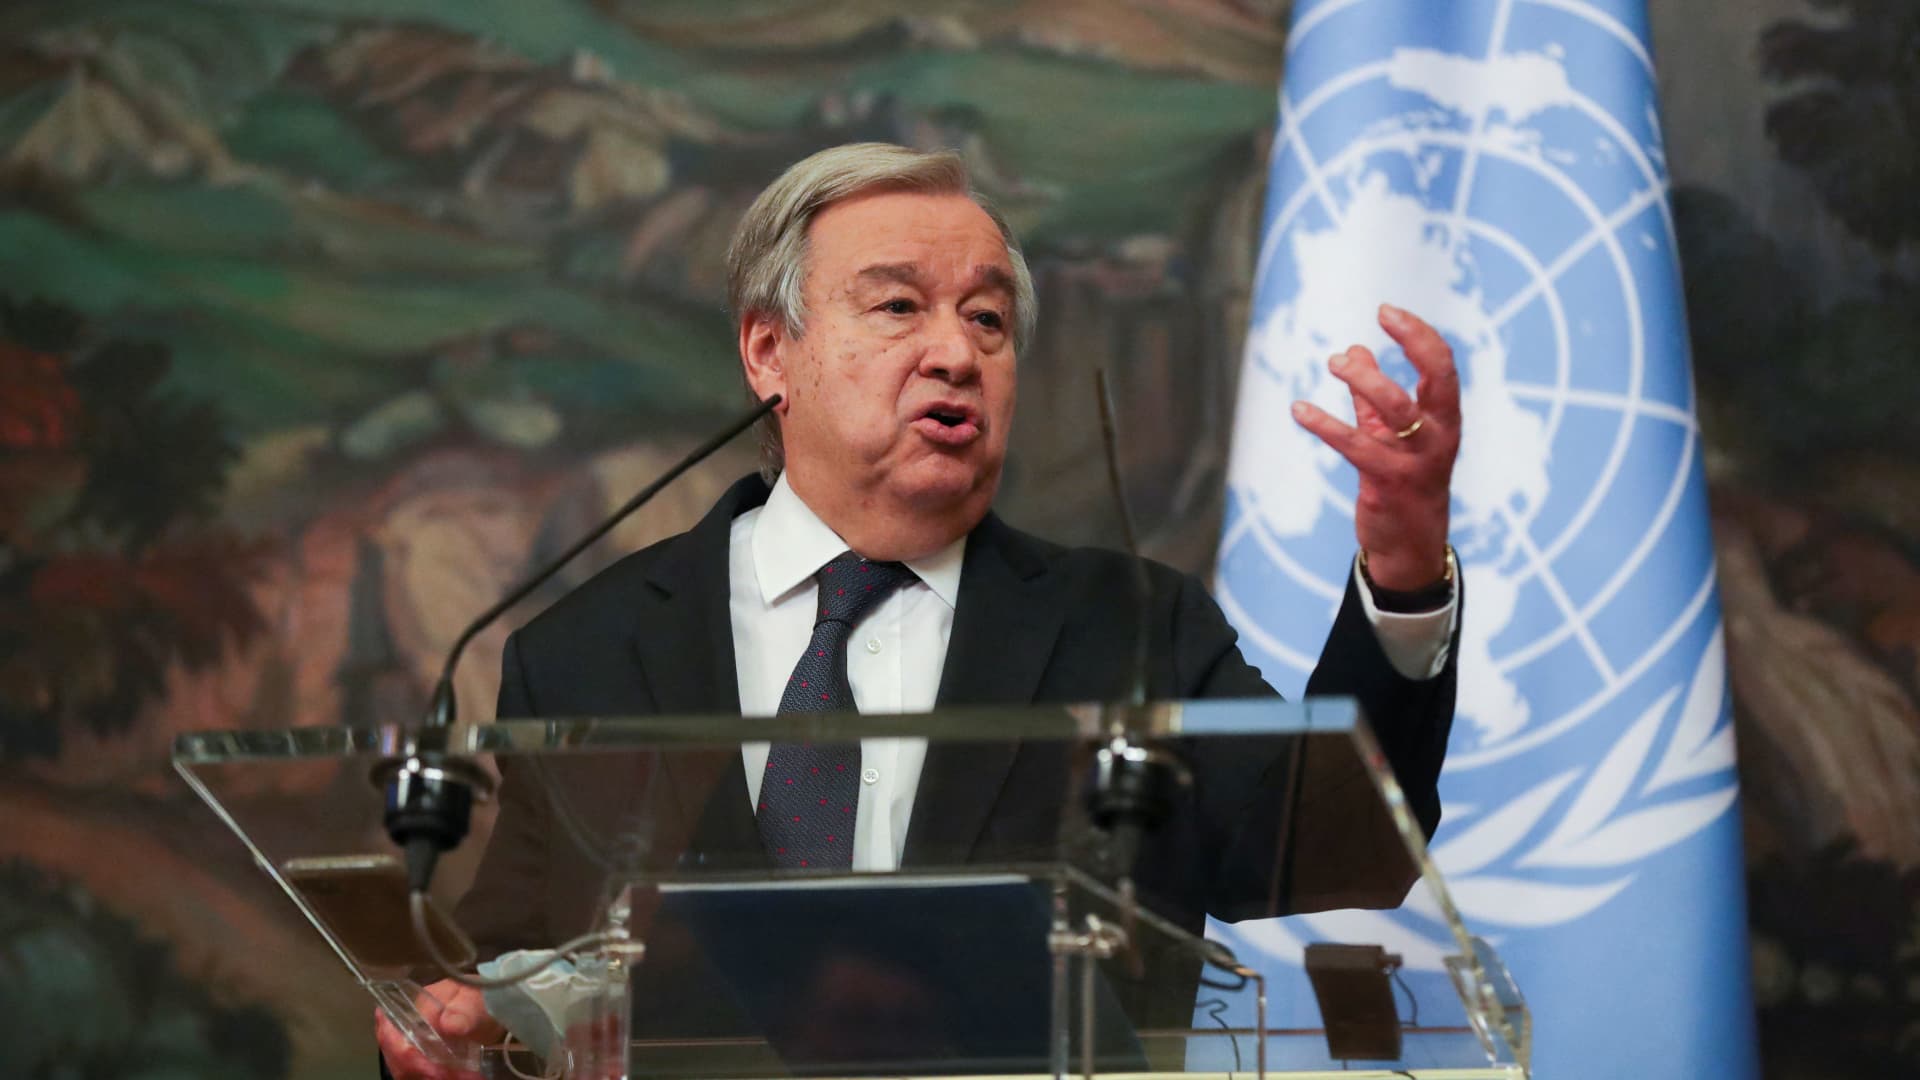 UN Secretary-General Antonio Guterres speaks at a new conference after his meeting with Russian Foreign Minister Sergei Lavrov in Moscow, Russia, April 26, 2022. 